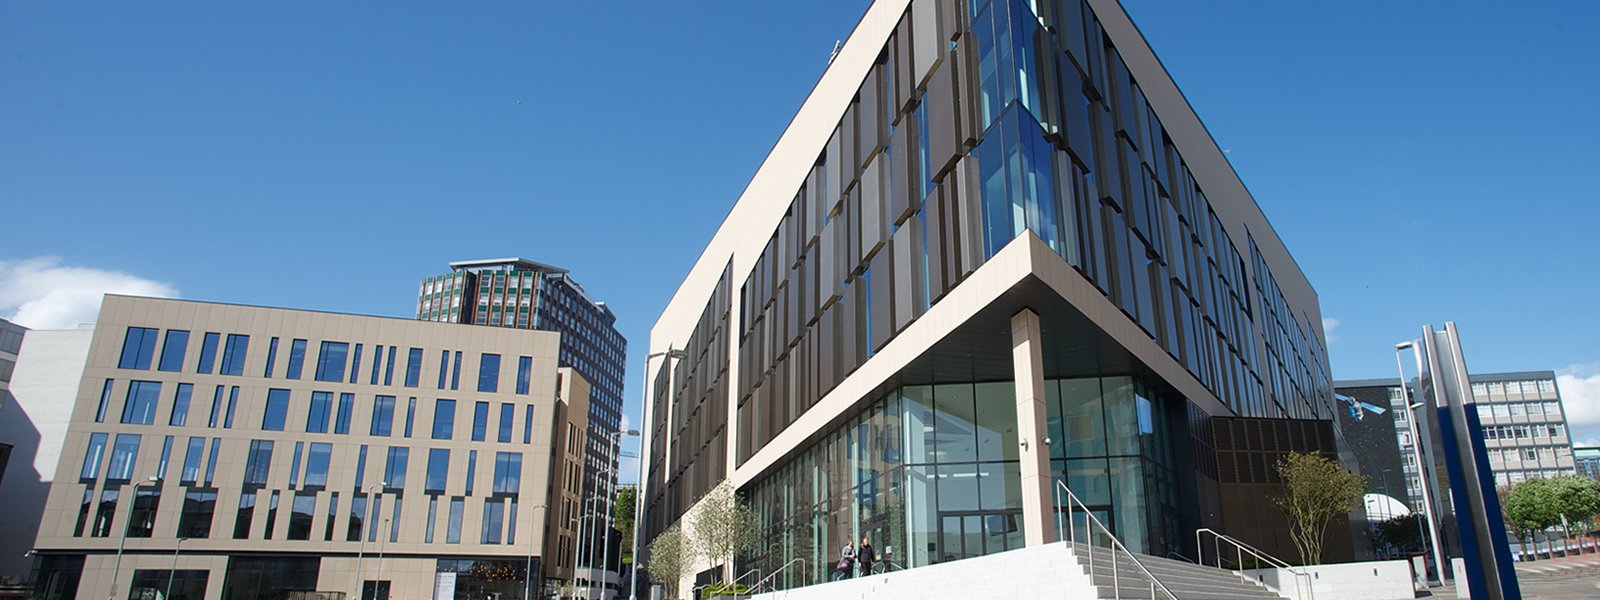 TIC Building, University of Strathclyde